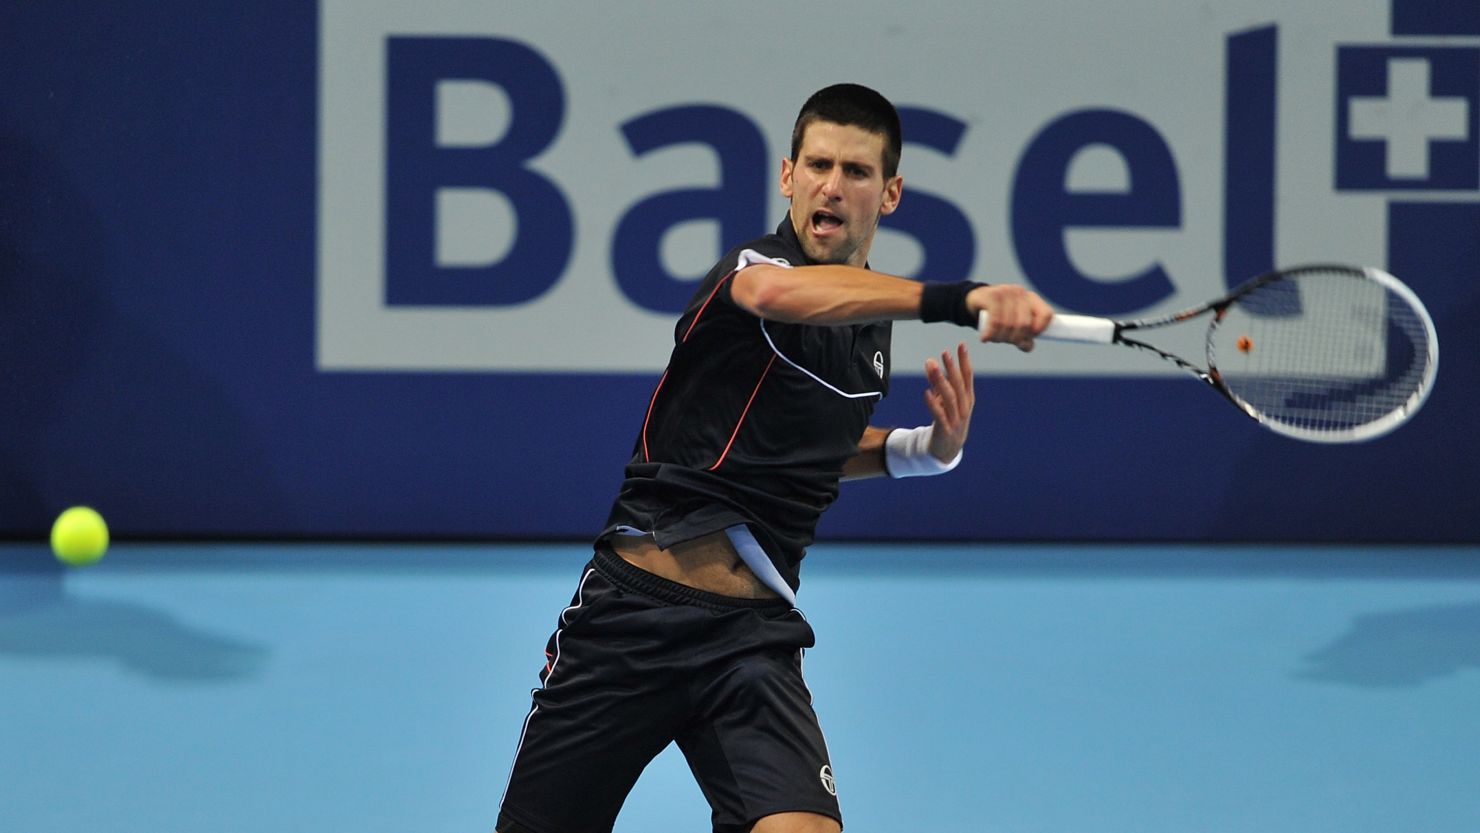 Novak Djokovic took under an hour to power into the quarterfinals of the Swiss Indoors event